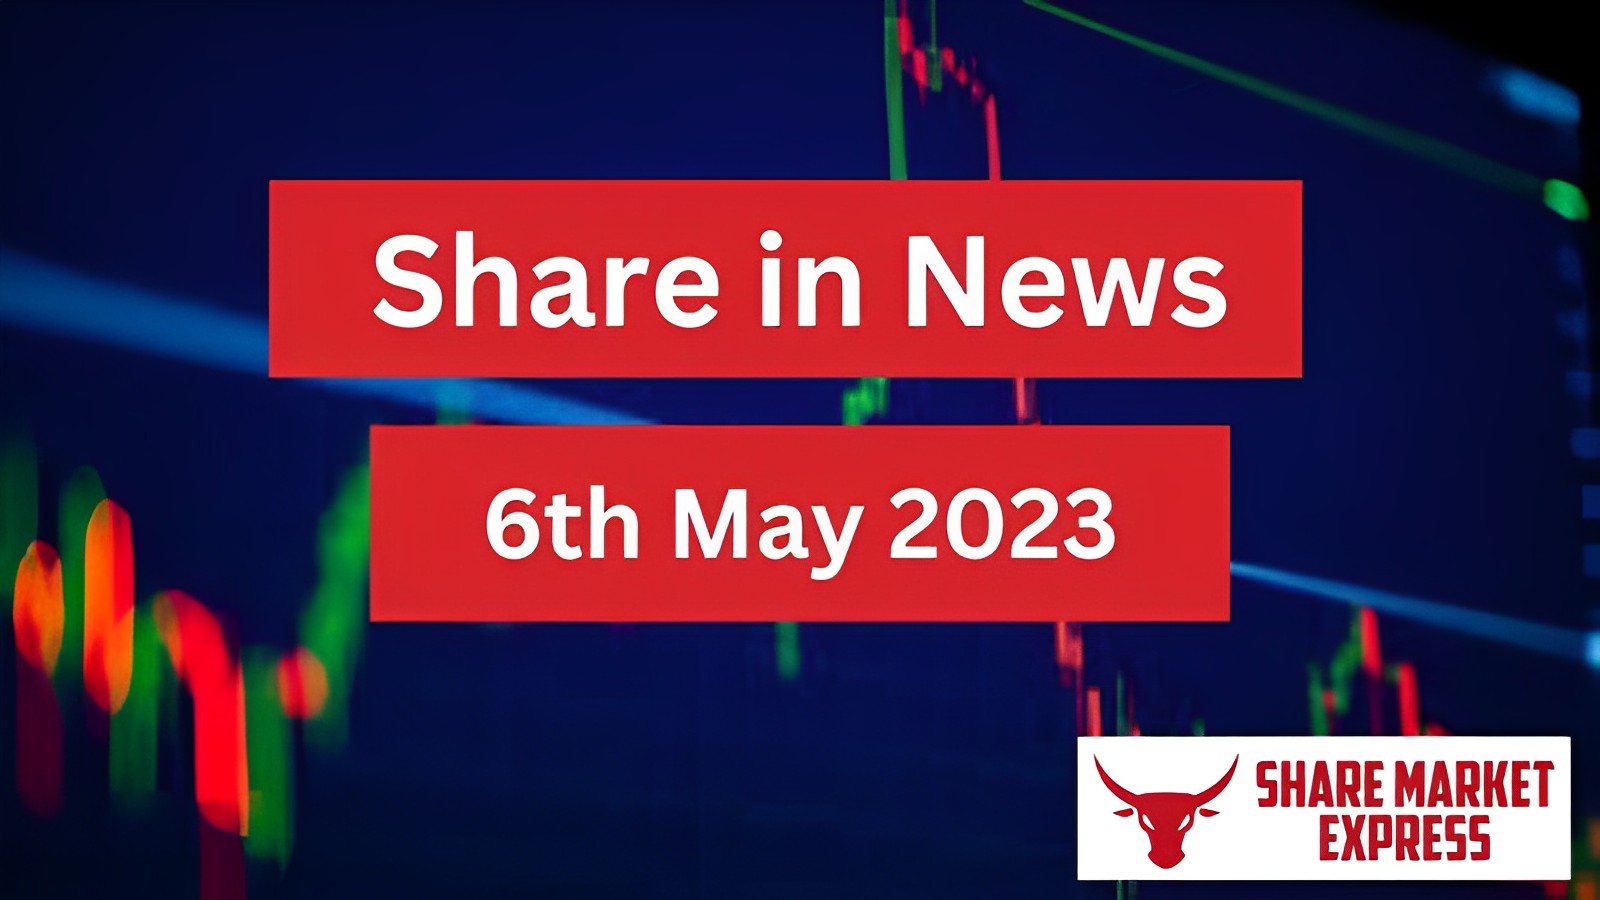 Share in News | Bank of India, Grindwell, Aether, Greenpanel & Others in NEWS Today